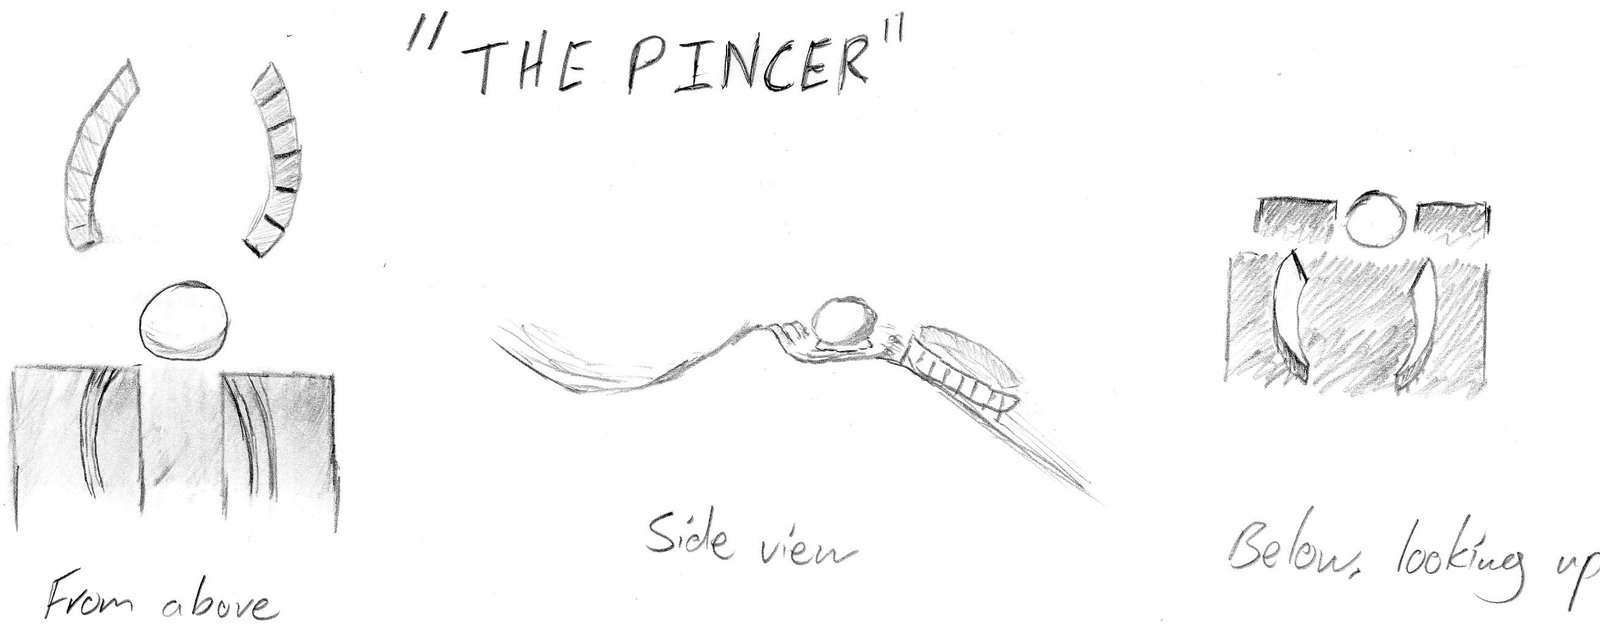 The Pincer